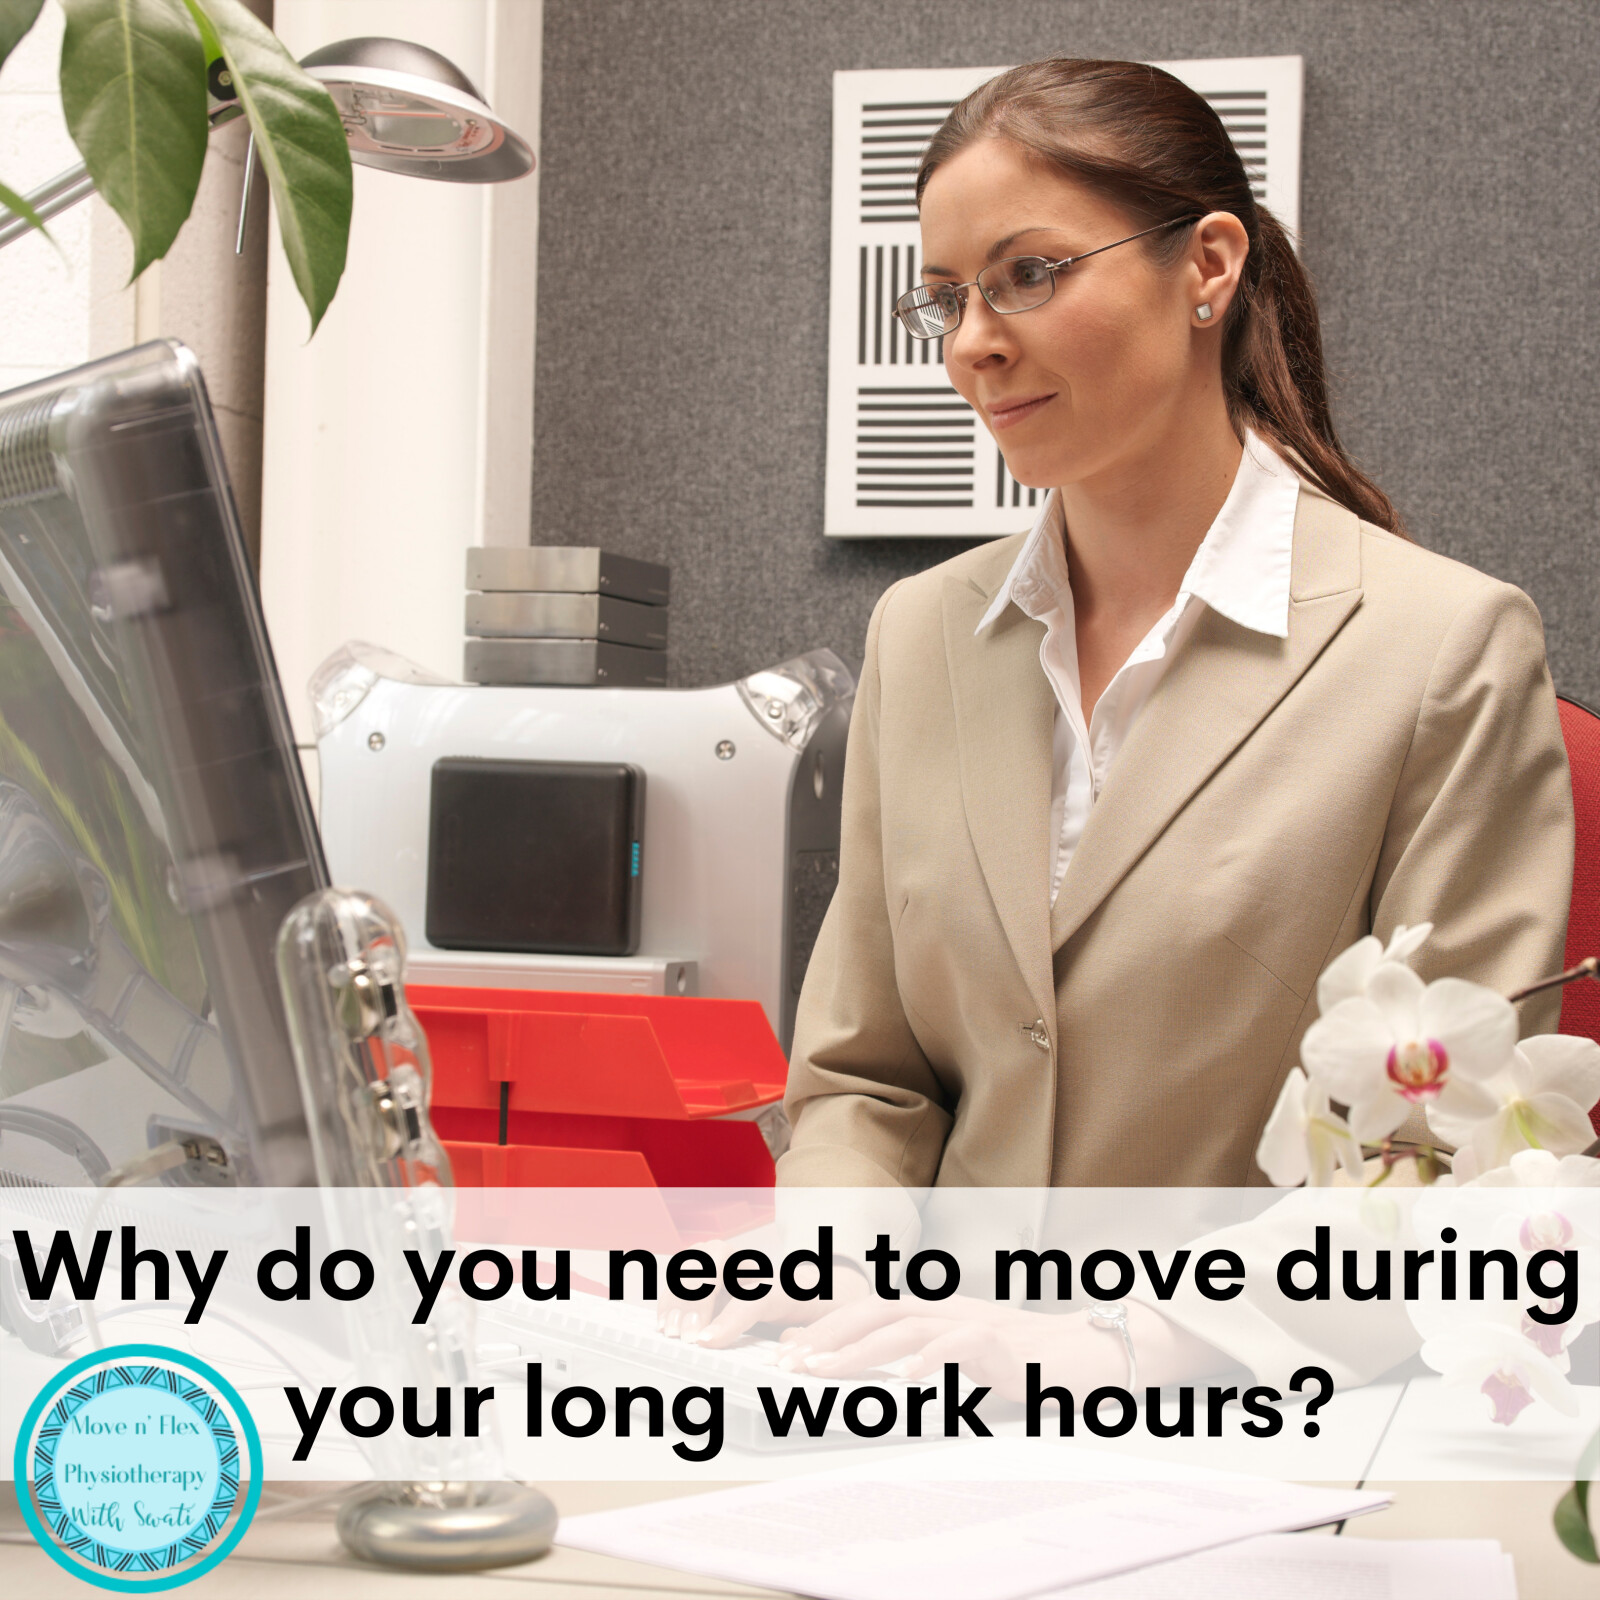 Why do you need to move during your long work hours?